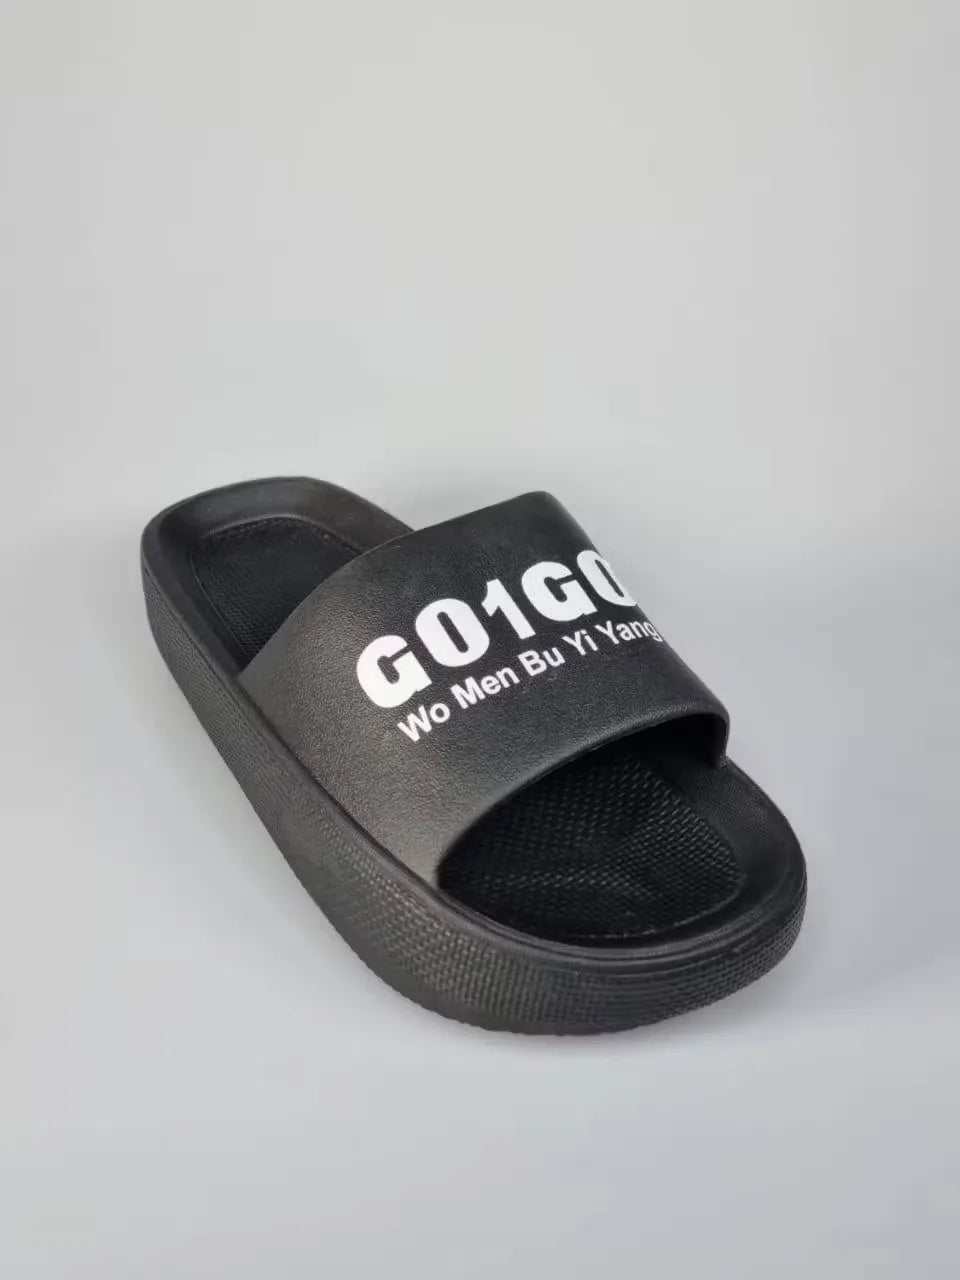 A pair of black unisex slippers with a comfortable-looking design and a unique G01G0 print. The slippers are perfect for both men and women and can be worn for relaxation or running errands.